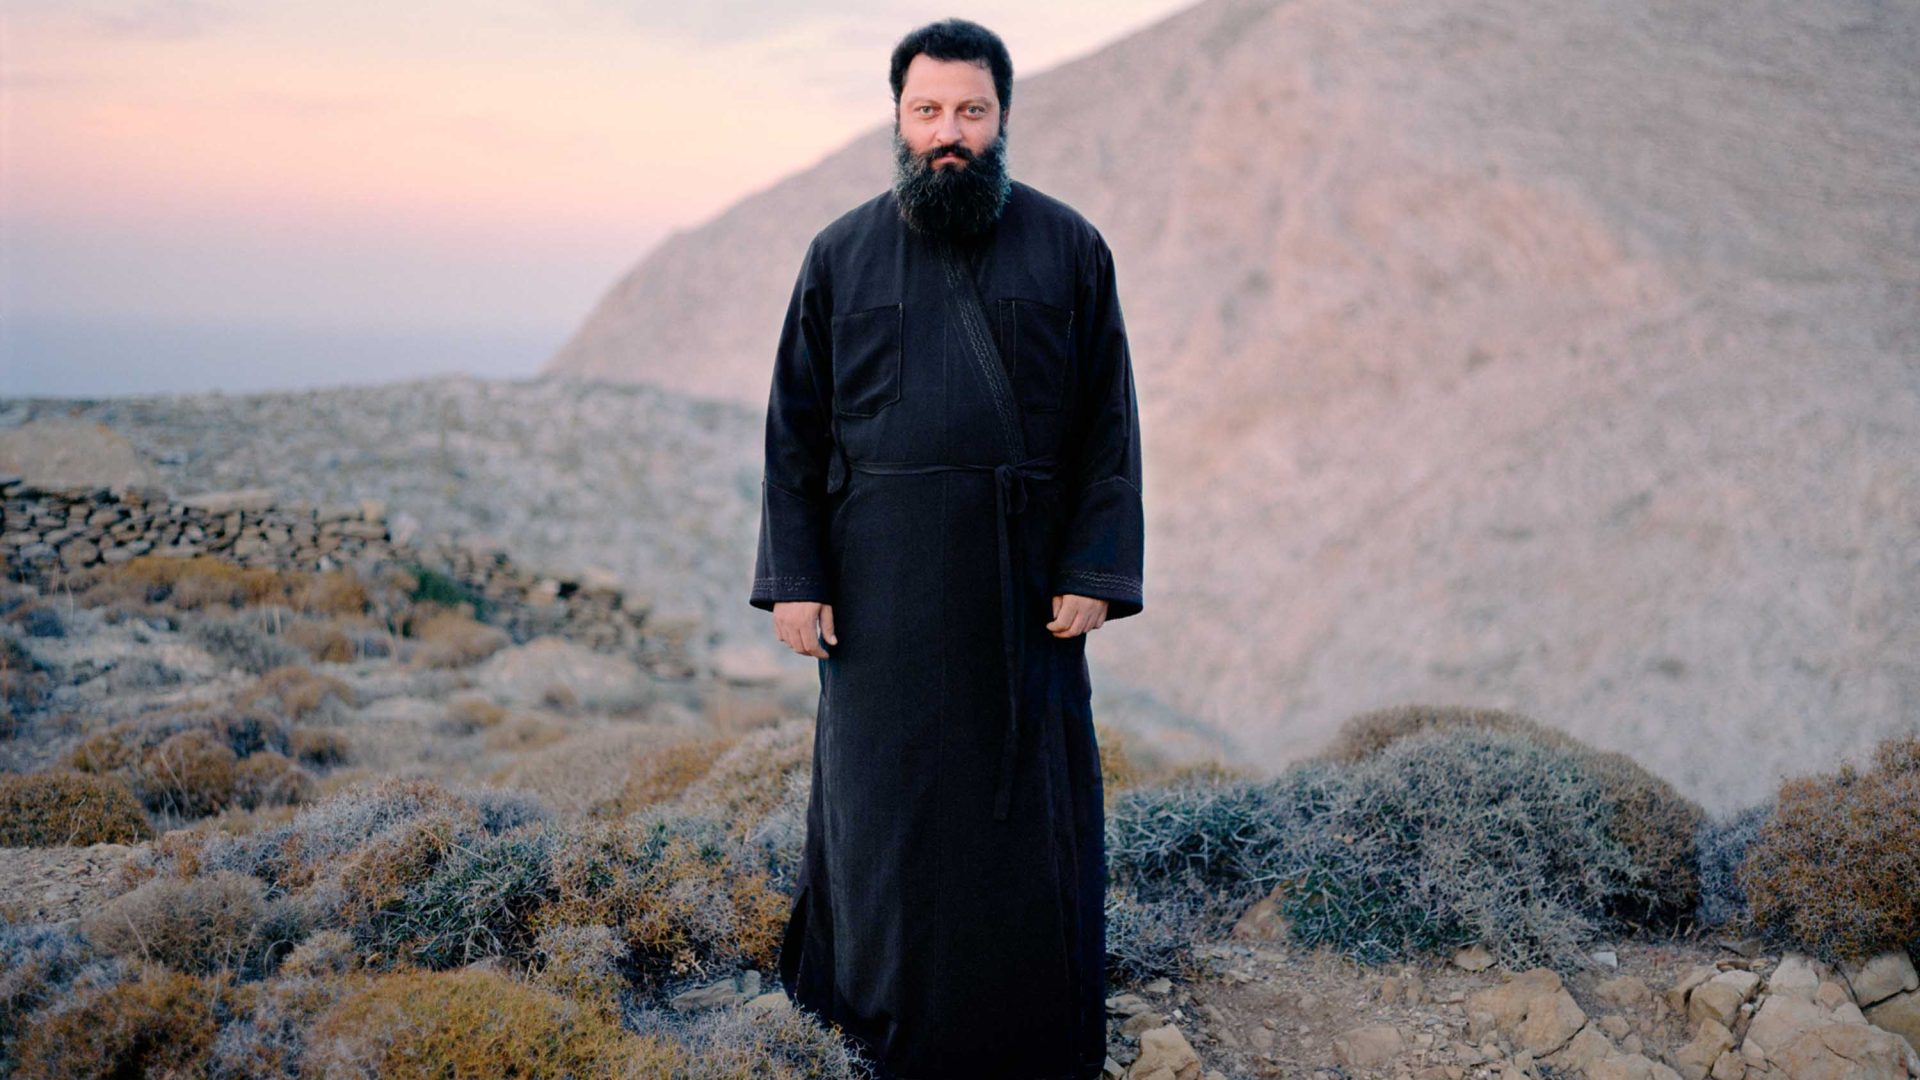 A man in a black robe in an arid landscape looks straight to camera.